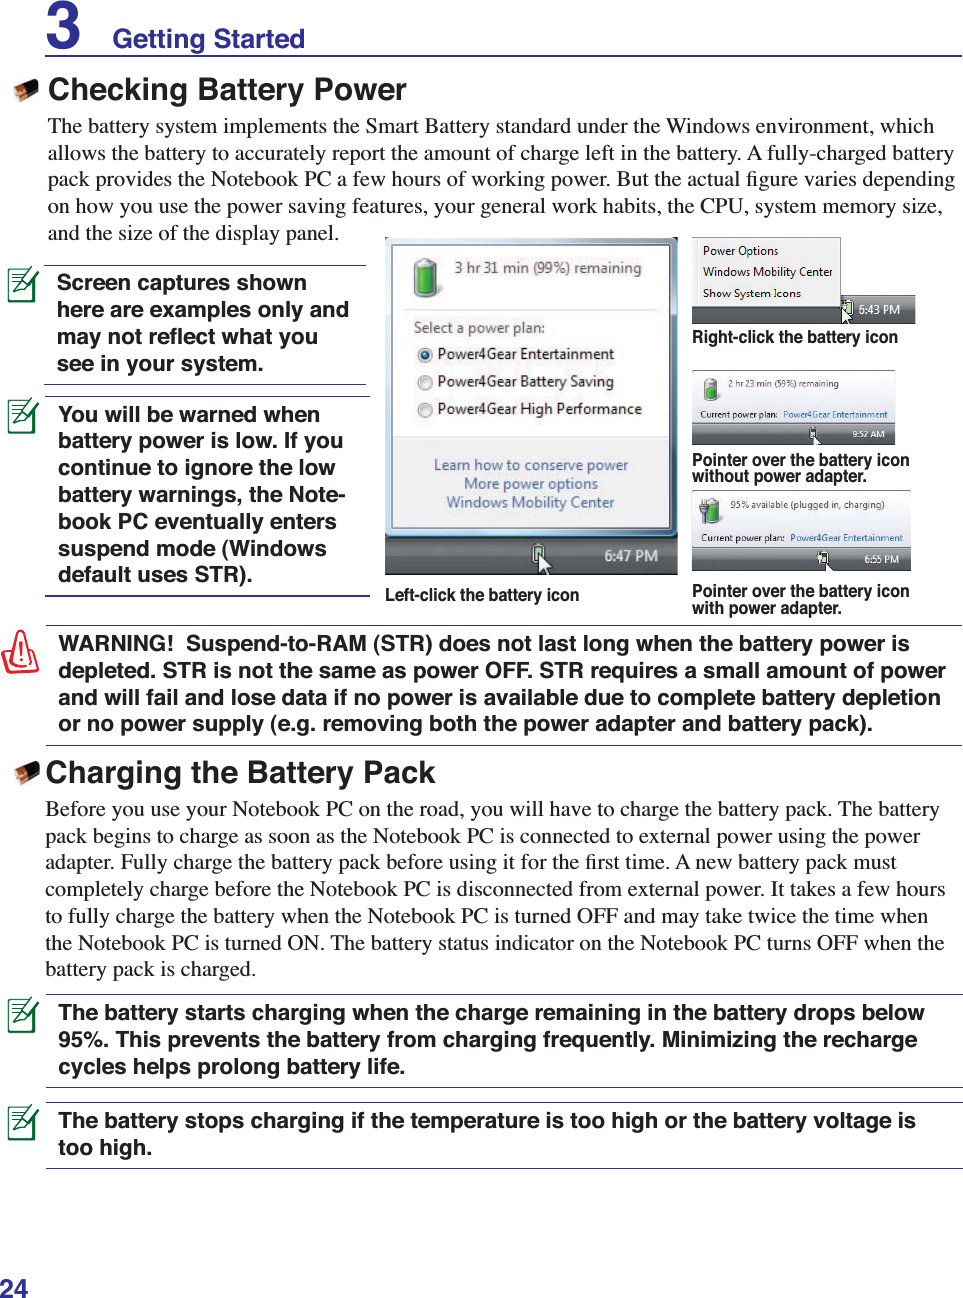 24You will be warned when battery power is low. If you continue to ignore the low battery warnings, the Note-book PC eventually enters suspend mode (Windows default uses STR).WARNING!  Suspend-to-RAM (STR) does not last long when the battery power is depleted. STR is not the same as power OFF. STR requires a small amount of power and will fail and lose data if no power is available due to complete battery depletion or no power supply (e.g. removing both the power adapter and battery pack).Screen captures shown here are examples only and may not reﬂect what you see in your system. Checking Battery PowerThe battery system implements the Smart Battery standard under the Windows environment, which allows the battery to accurately report the amount of charge left in the battery. A fully-charged battery pack provides the Notebook PC a few hours of working power. But the actual ﬁgure varies depending on how you use the power saving features, your general work habits, the CPU, system memory size, and the size of the display panel.Left-click the battery iconPointer over the battery icon without power adapter.Pointer over the battery icon with power adapter.Right-click the battery iconThe battery stops charging if the temperature is too high or the battery voltage is too high.Charging the Battery PackBefore you use your Notebook PC on the road, you will have to charge the battery pack. The battery pack begins to charge as soon as the Notebook PC is connected to external power using the power adapter. Fully charge the battery pack before using it for the ﬁrst time. A new battery pack must completely charge before the Notebook PC is disconnected from external power. It takes a few hours to fully charge the battery when the Notebook PC is turned OFF and may take twice the time when the Notebook PC is turned ON. The battery status indicator on the Notebook PC turns OFF when the battery pack is charged.The battery starts charging when the charge remaining in the battery drops below 95%. This prevents the battery from charging frequently. Minimizing the recharge cycles helps prolong battery life.3    Getting Started